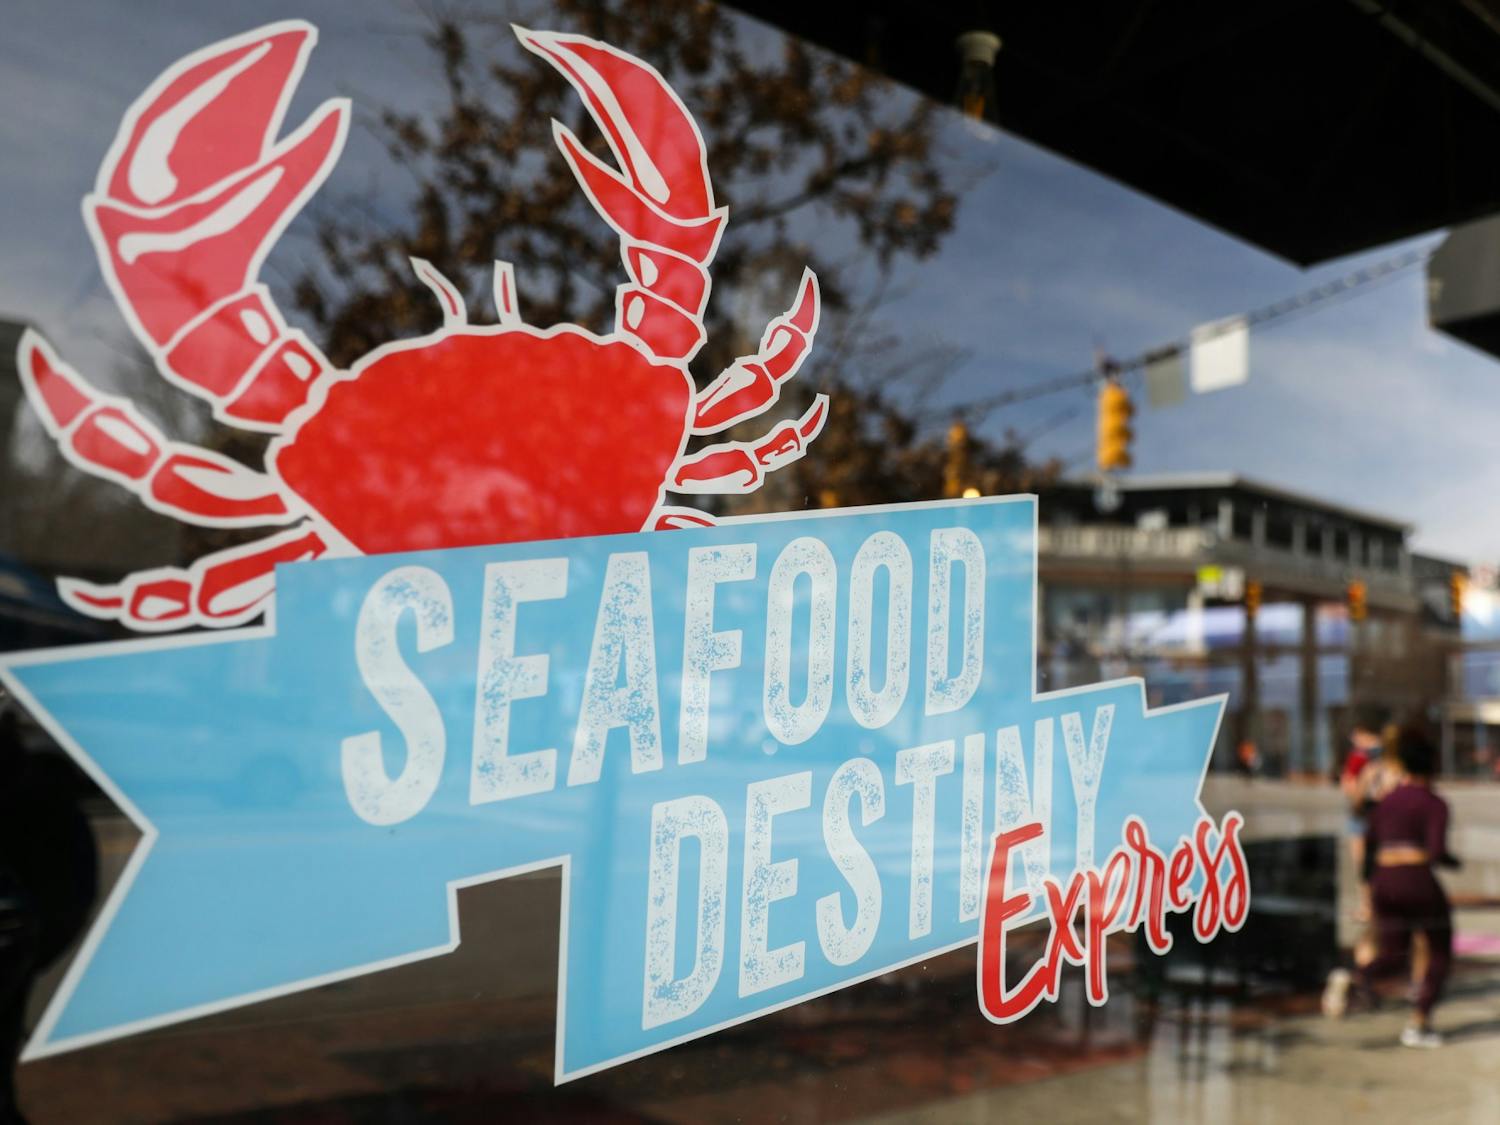 Anthony Knotts, owner of Seafood Destiny on Franklin Street, is facing multiple lawsuits.